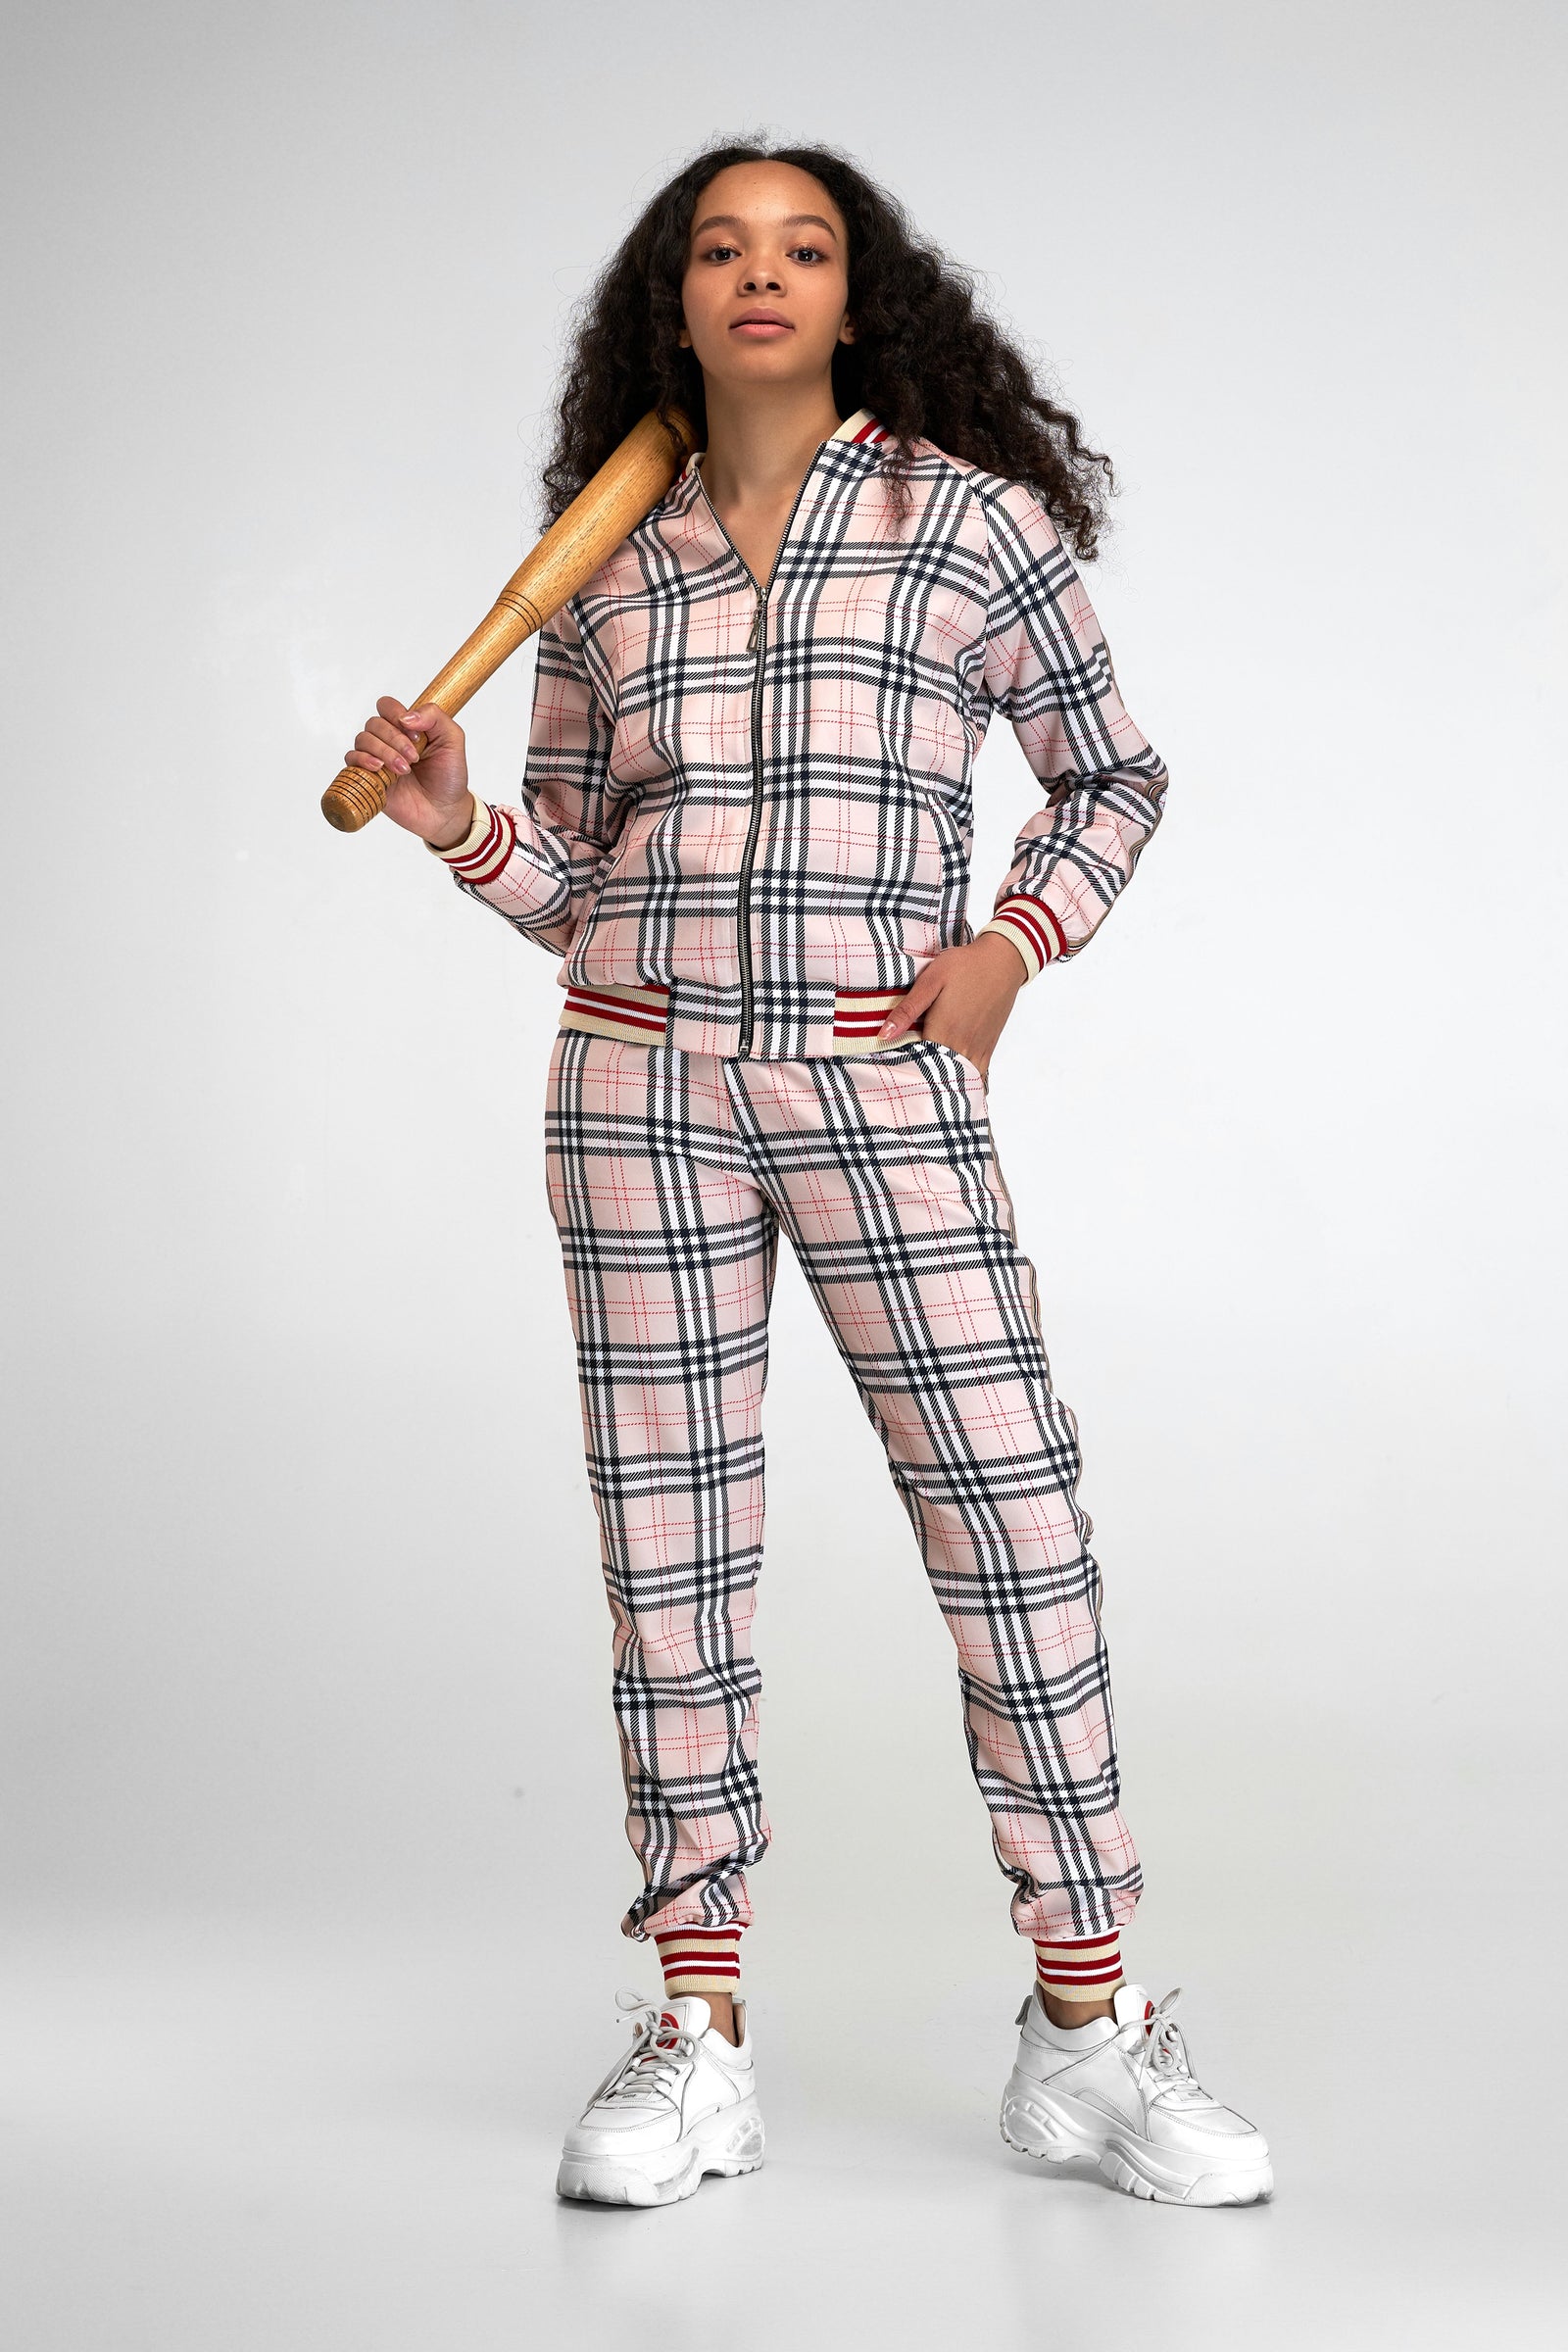 Plaid Printed Womens Three Piece Tracksuit Set With Zipper Up Ladies Summer  Jackets And Pants Streetwear Outfit P230320 From Mengqiqi05, $20.4